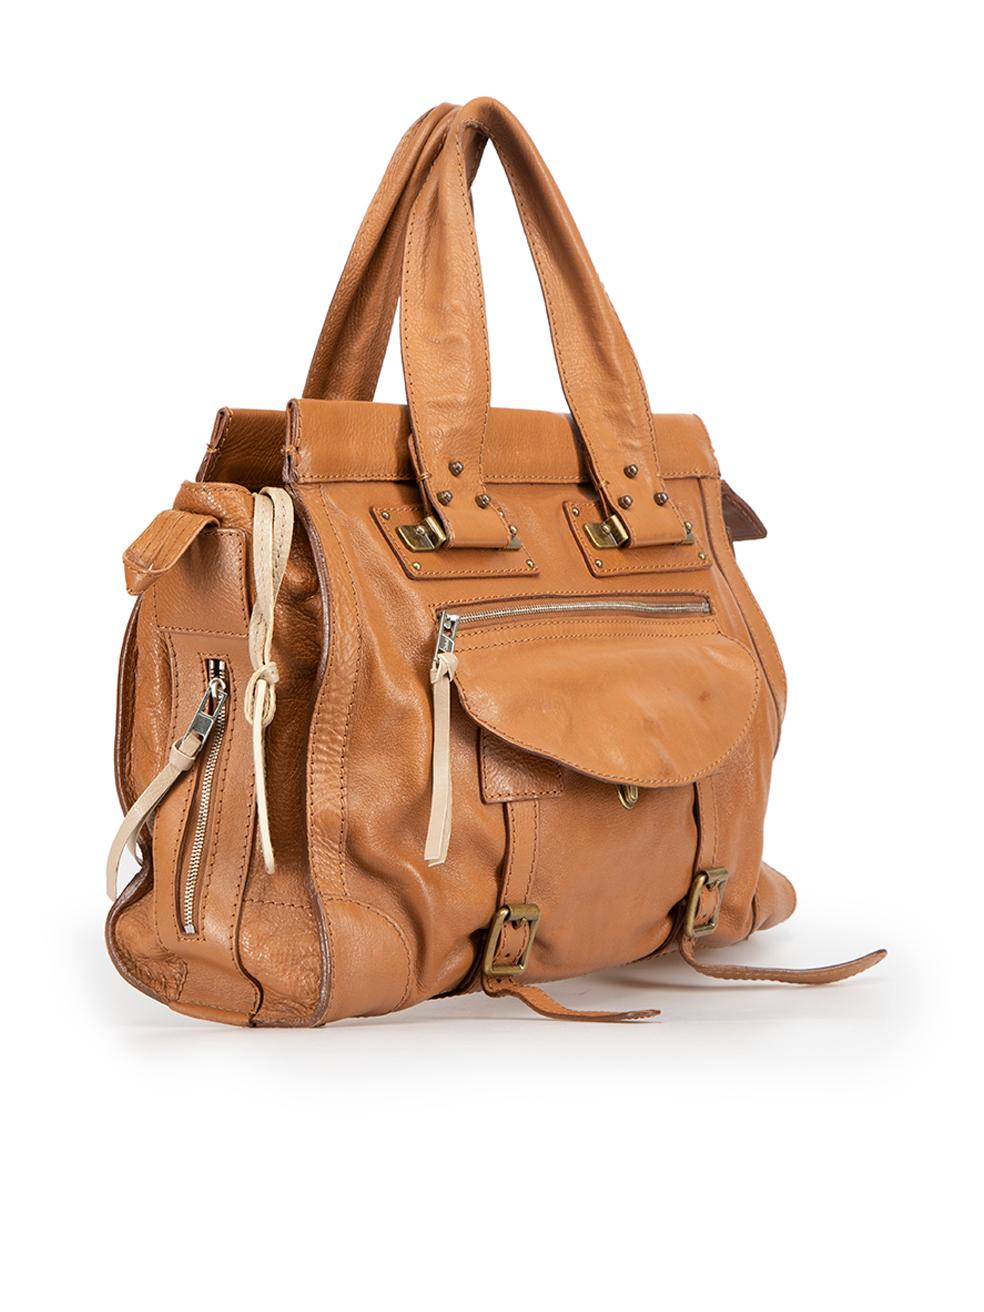 CONDITION is Good. Minor wear to bag is evident. Light wear to the lining, front and back with discoloured marks on this used Chloe designer resale item. 



Details


Brown

Leather

Top handle tote bag

1 front flap

4x exterior